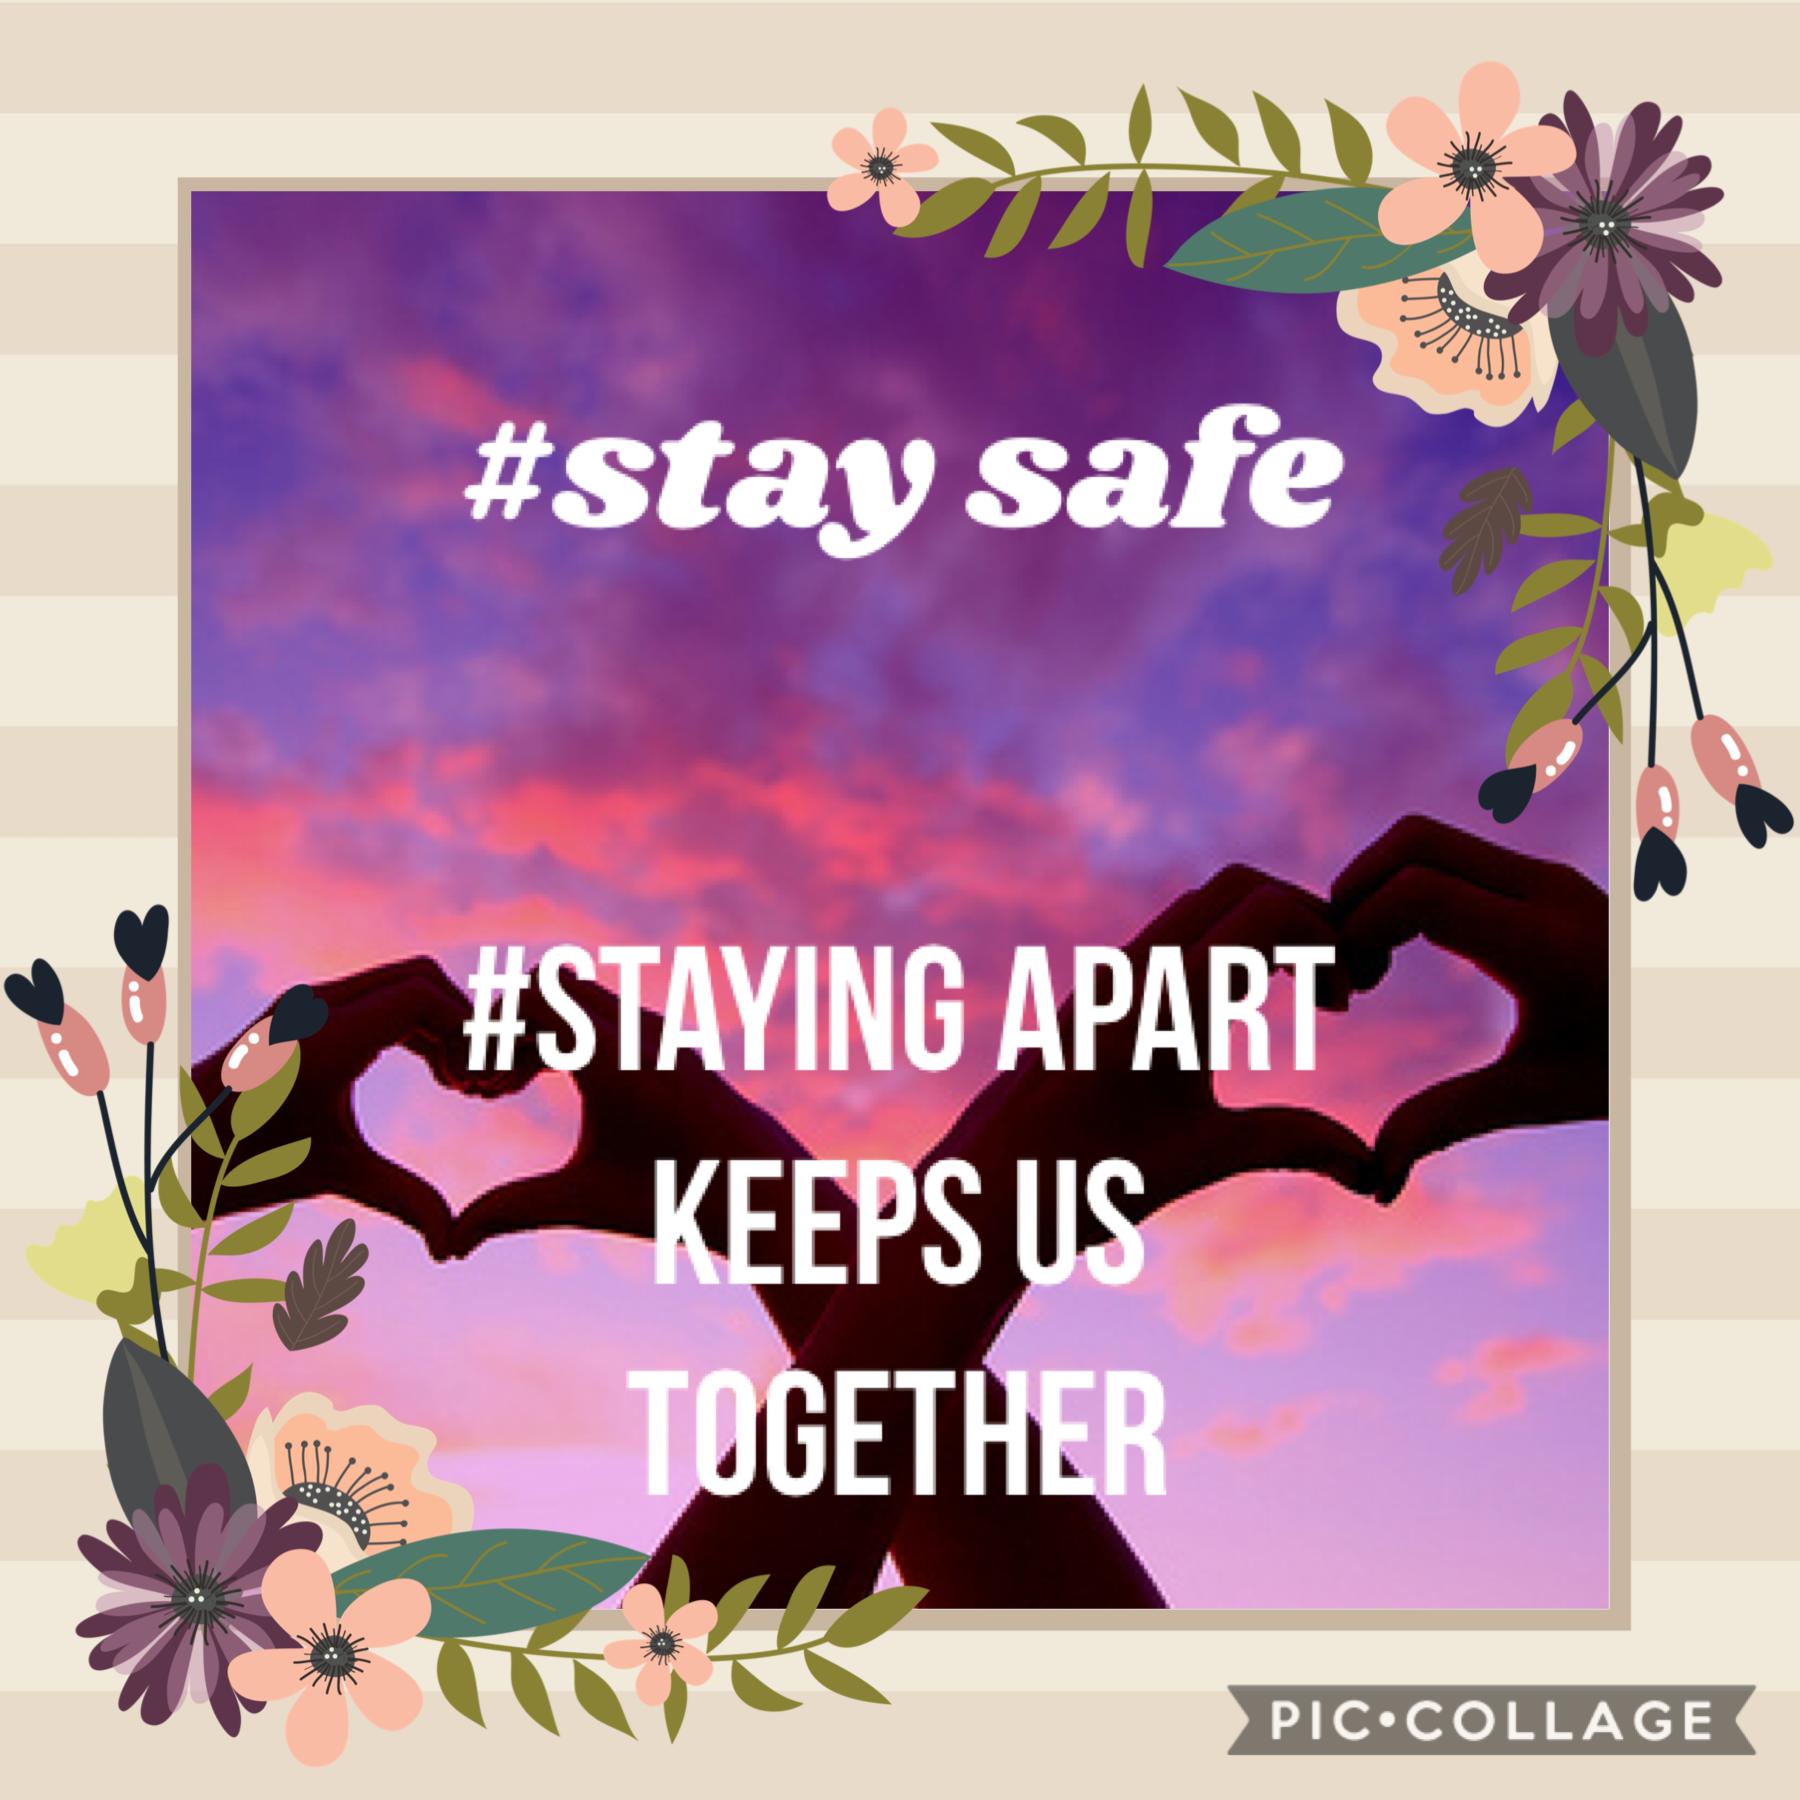 Remember in these times staying apart keeps us together 🥰
Don’t think the virus is ruining your life because all you need is love 💕 
And if you need reach out for help 😘
If you look around and look forward there is light 💡 